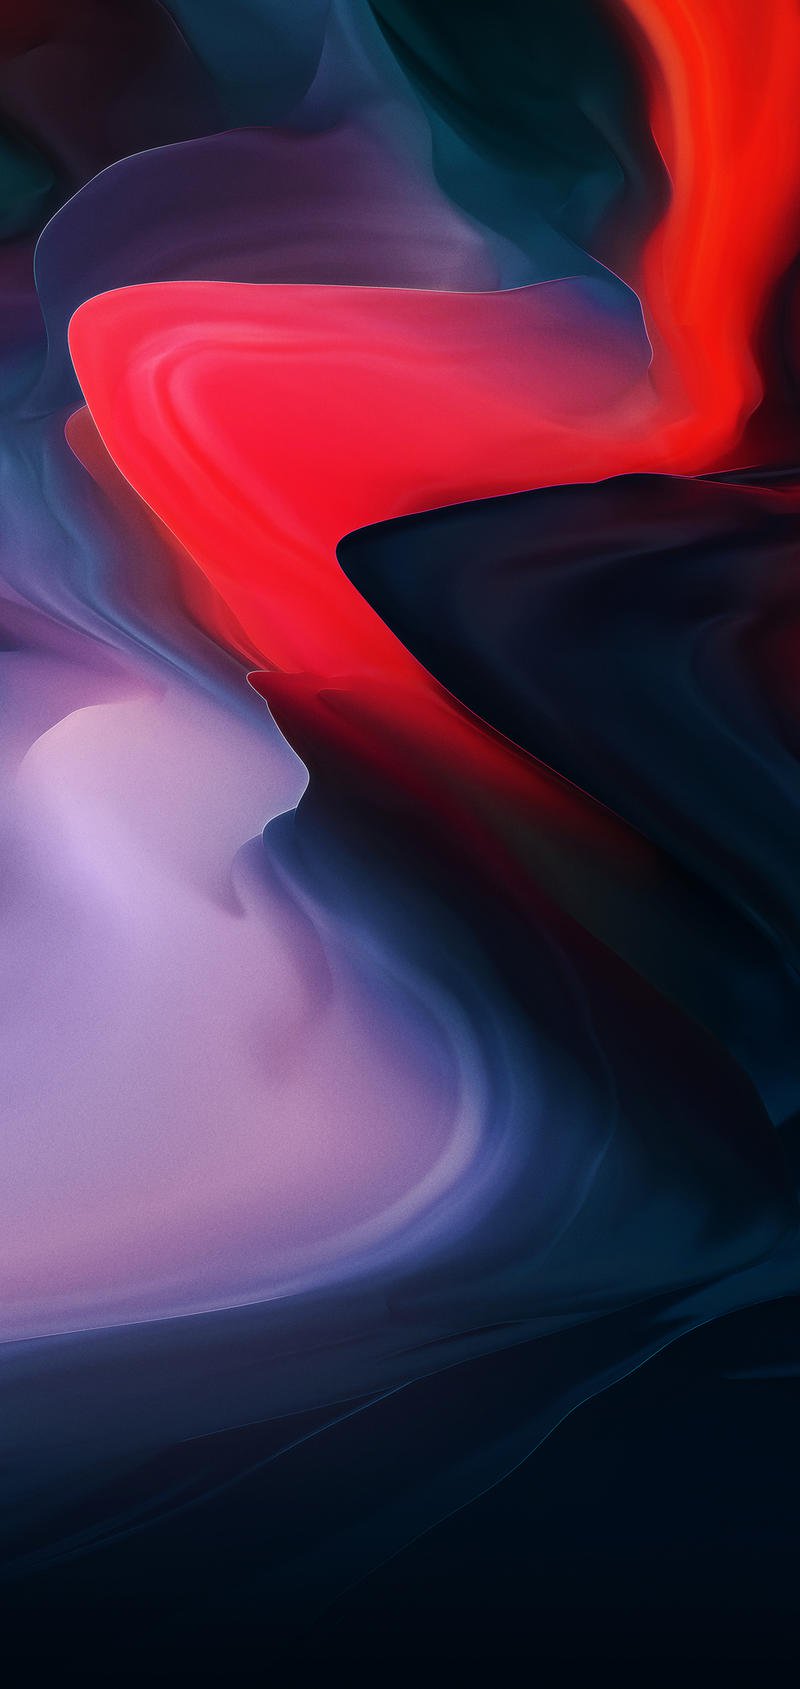 Snatch The Oneplus 6 Wallpapers In 4k Resolution Right - Oneplus 6 Wallpaper Hd , HD Wallpaper & Backgrounds